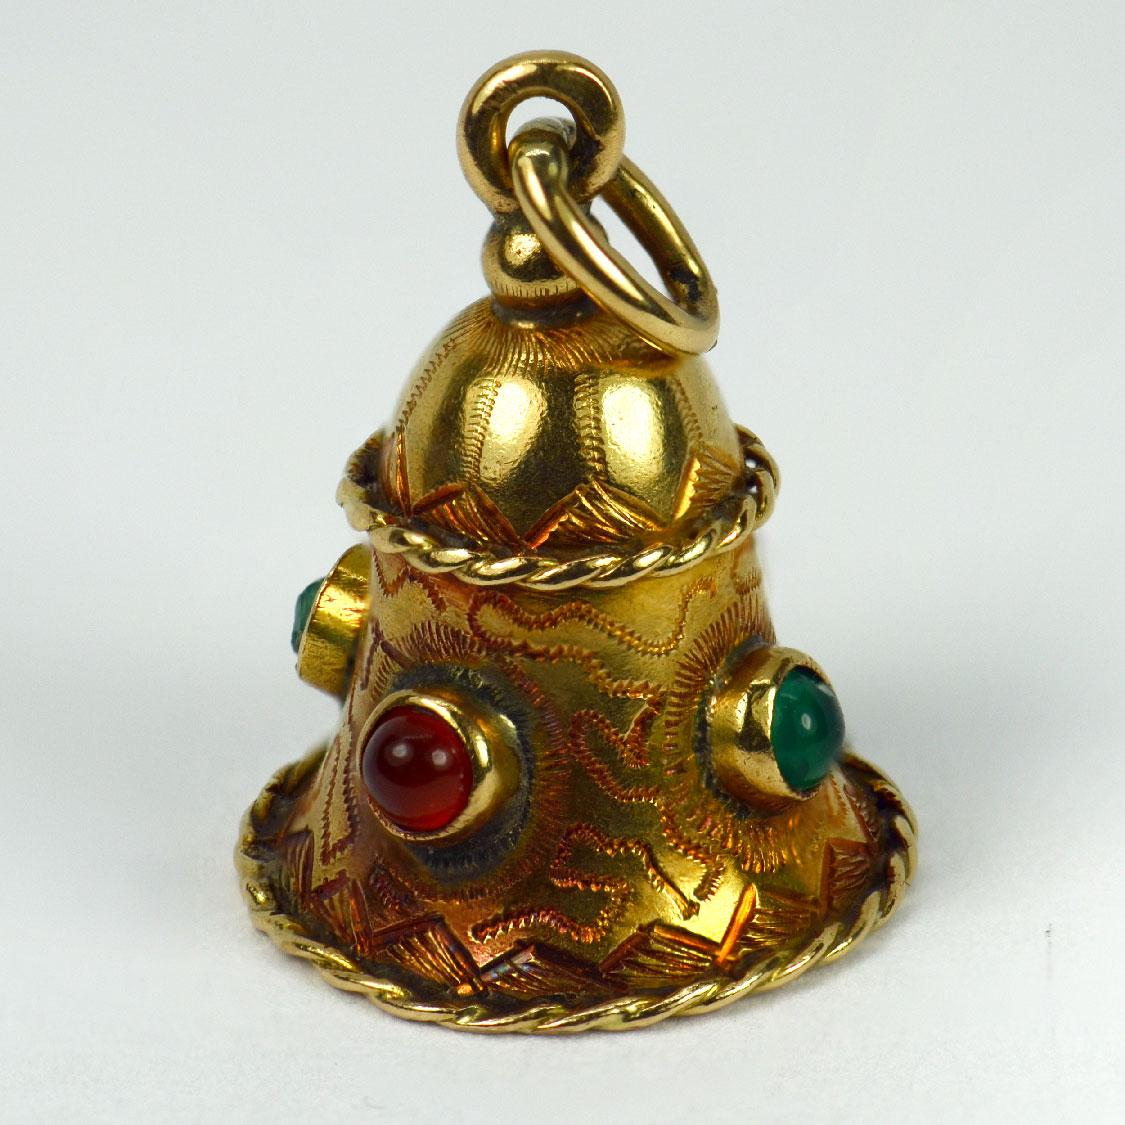 An 18 karat (18K) yellow gold charm pendant designed as a bell set with paste cabochons (one damaged). Stamped with the owl mark for French import and 18 karat gold.

Dimensions: 1.9 x 1.4 x 1.4 cm (not including jump ring)
Weight: 2.95 grams
